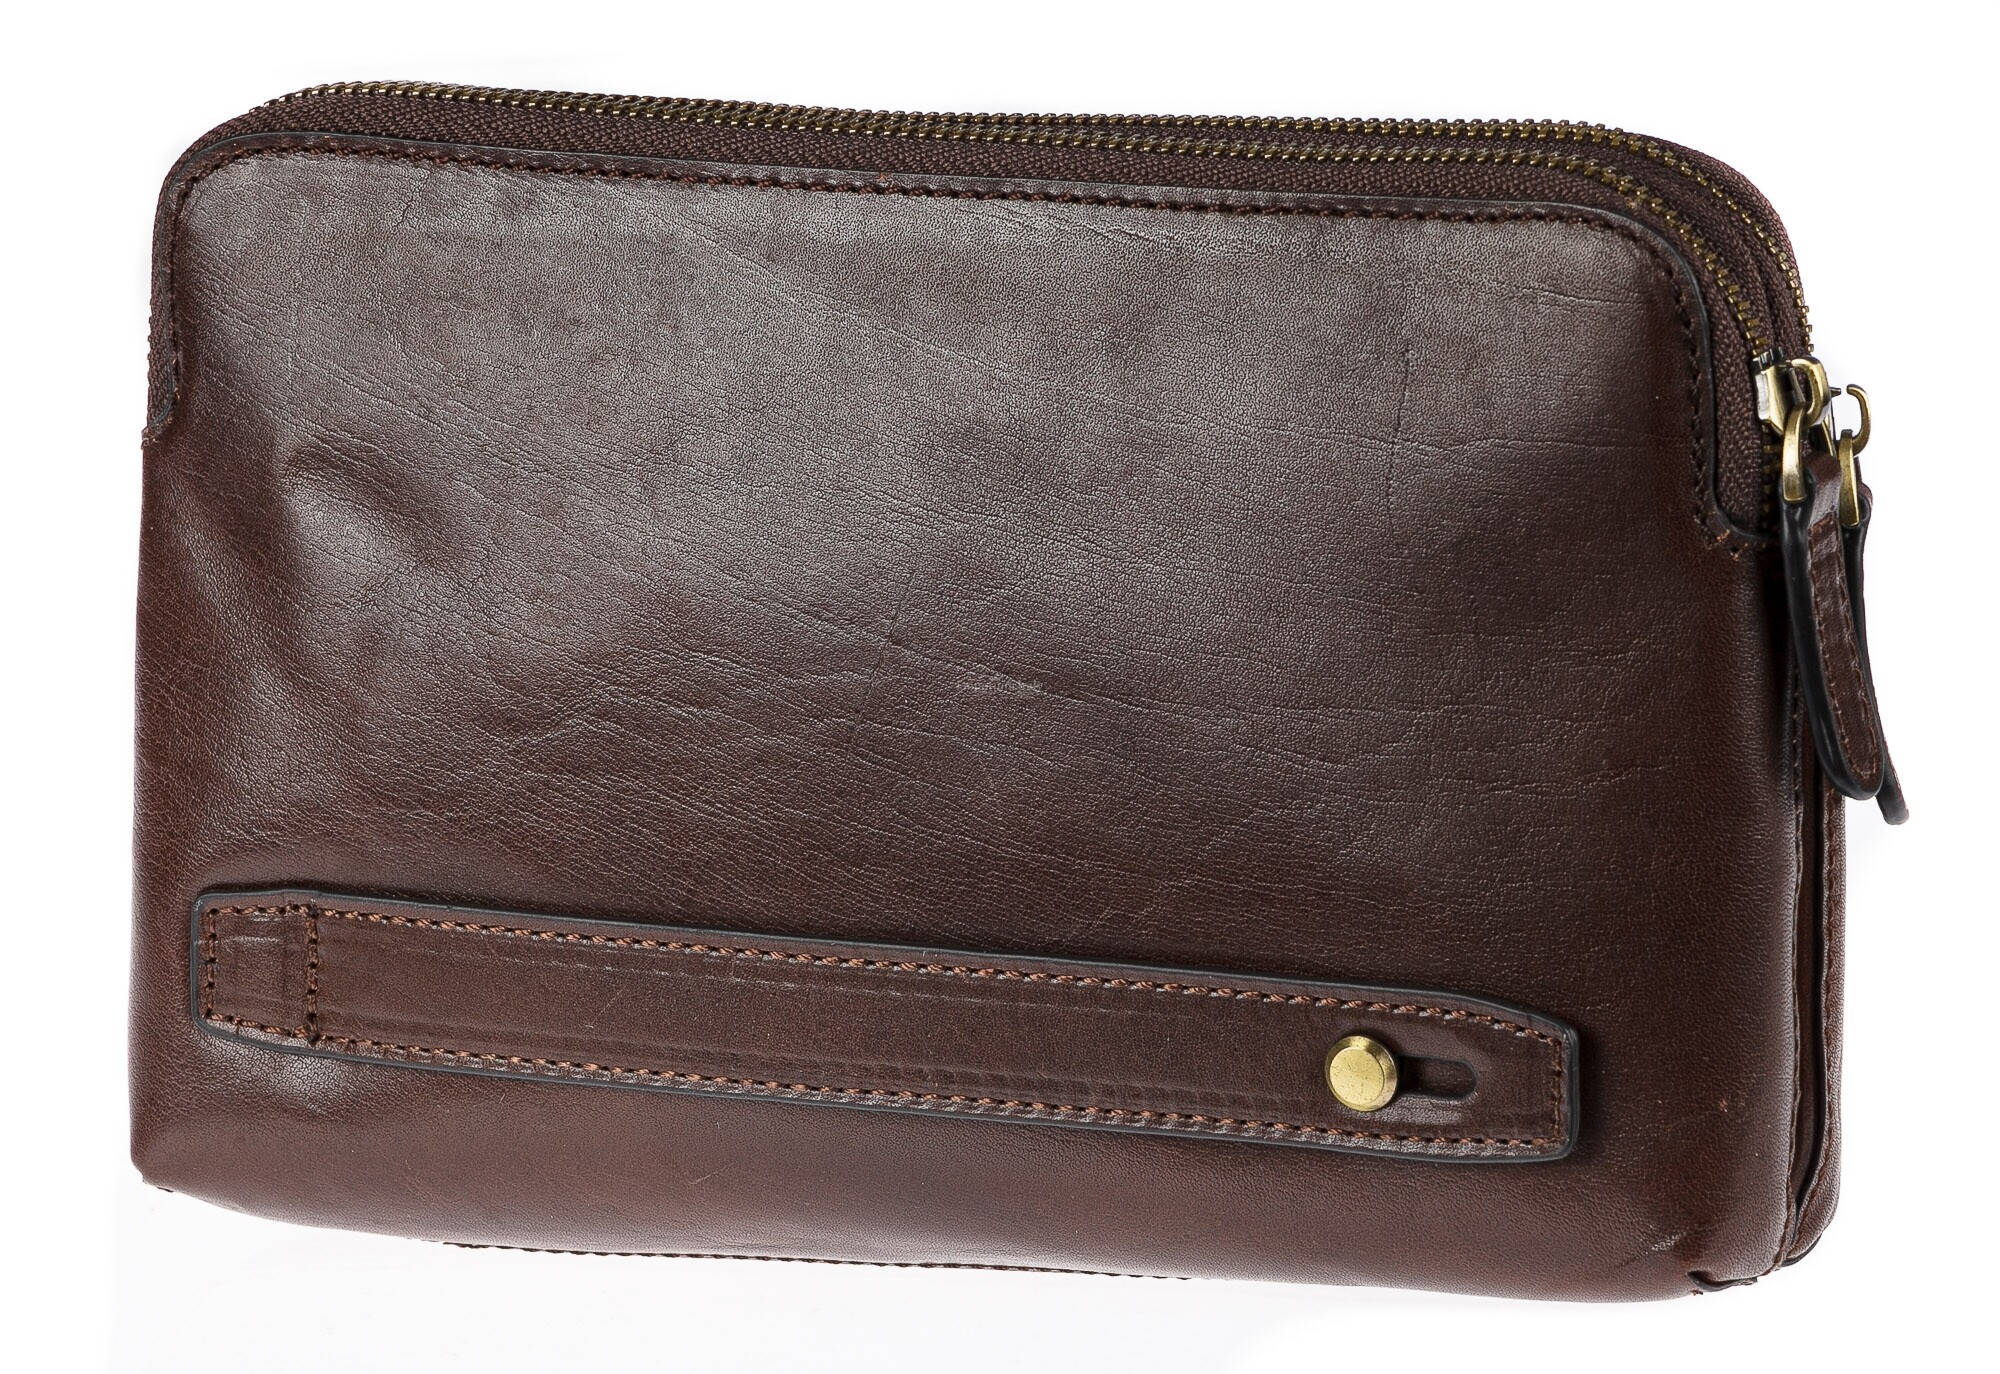 Genuine leather clutch for man JAMES, DARK BROWN colour, CHIAROSCURO, MADE  IN ITALY, MENS LEATHER CLUCH BAGS